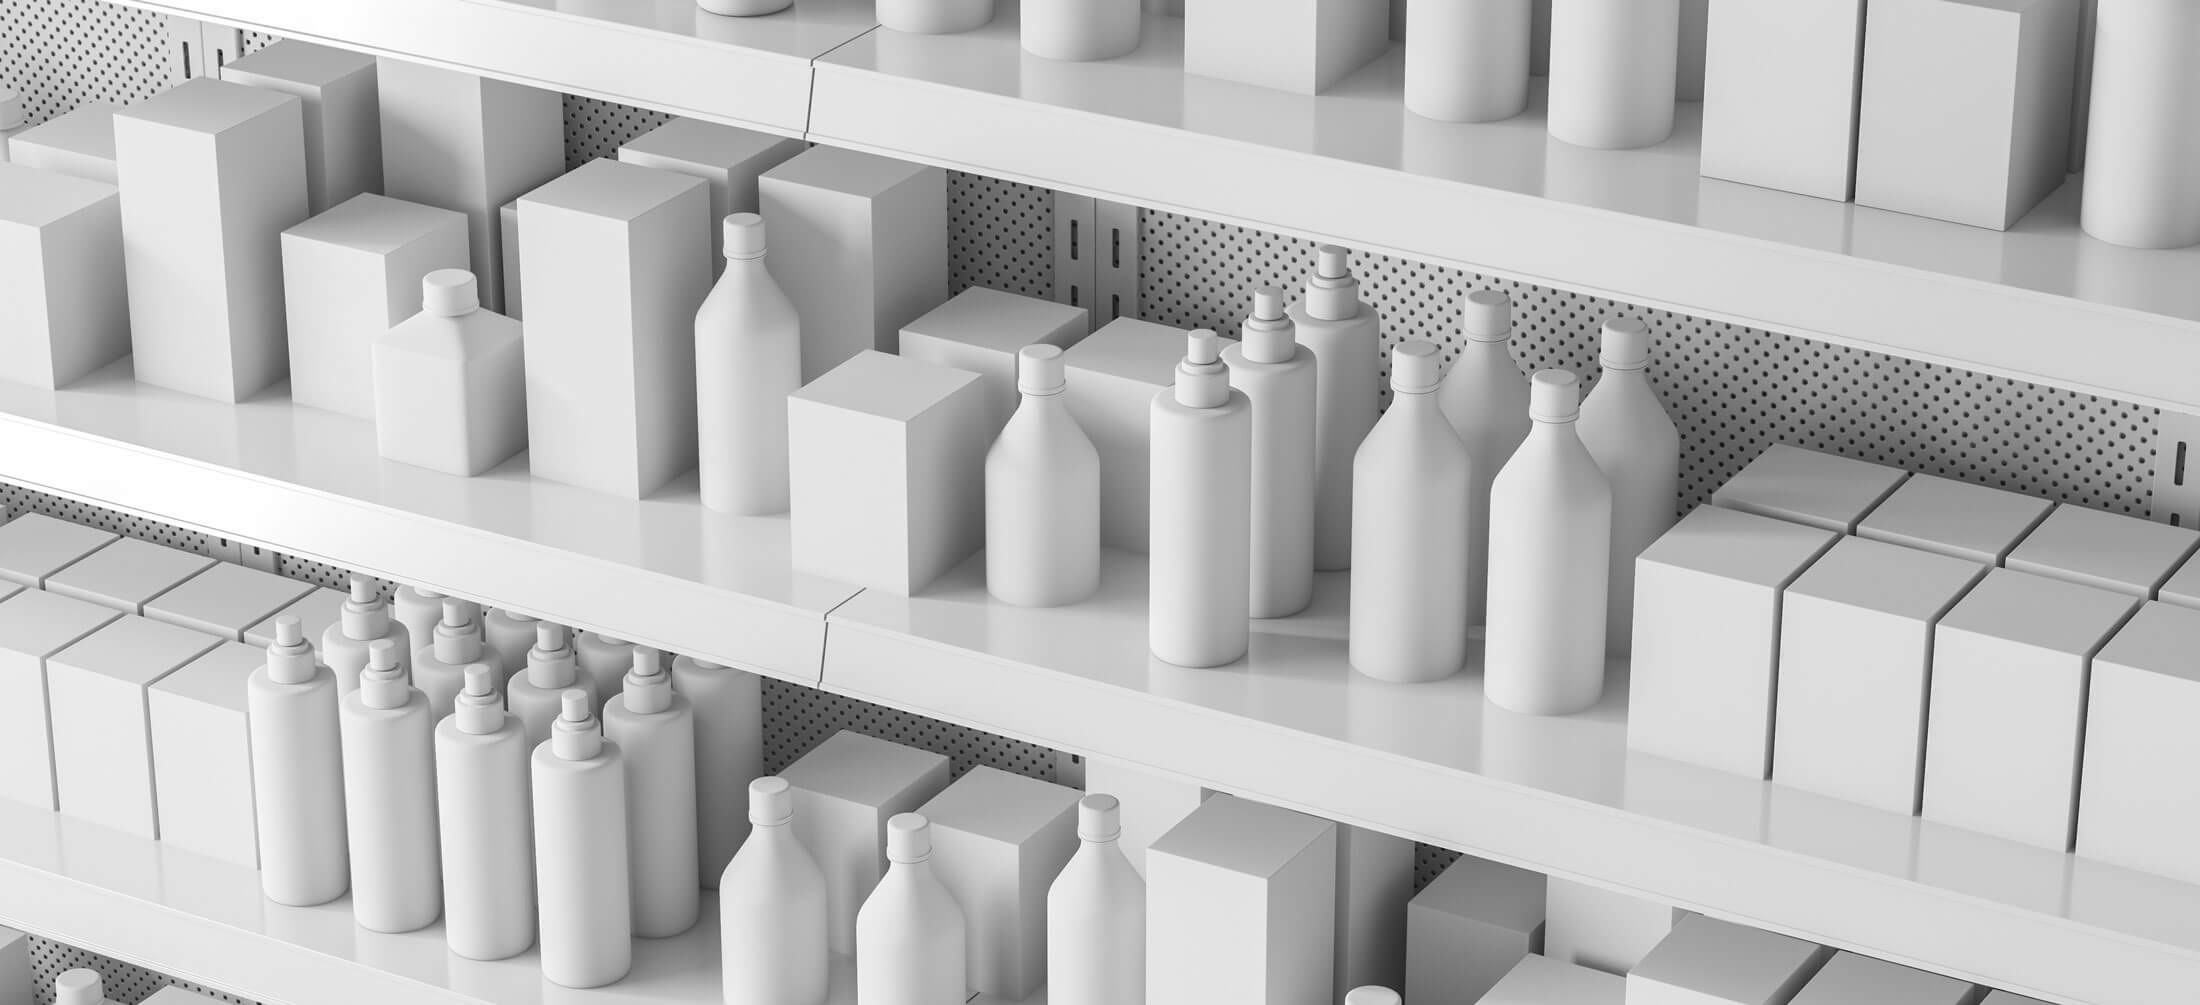 Minimalistic products on store shelves